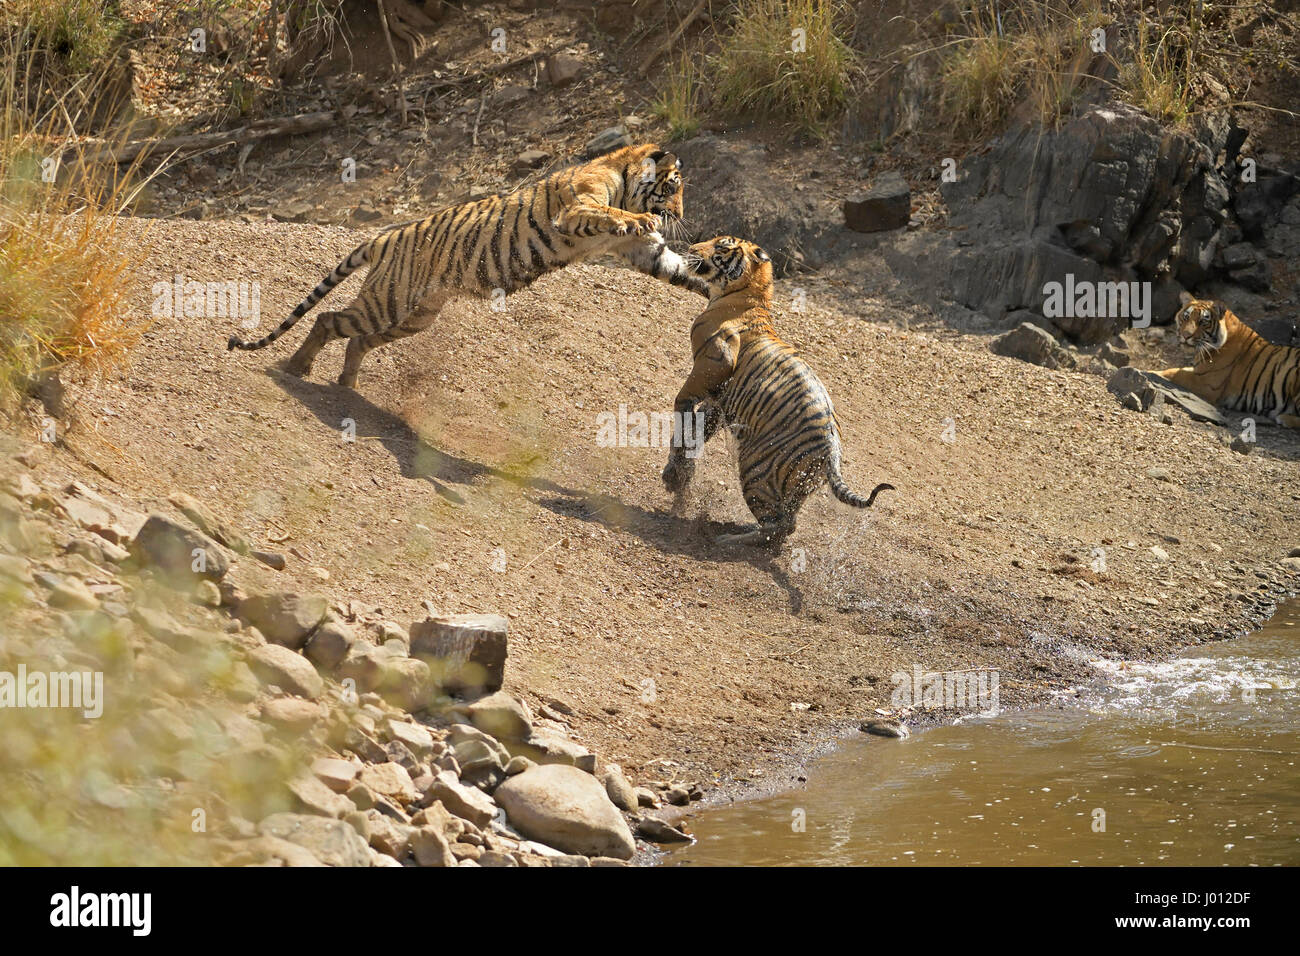 A family of tigers, mother with her two sub-adult cubs play fighting in a water hole during the hot and dry summers in Ranthambhore tiger reserve of I Stock Photo